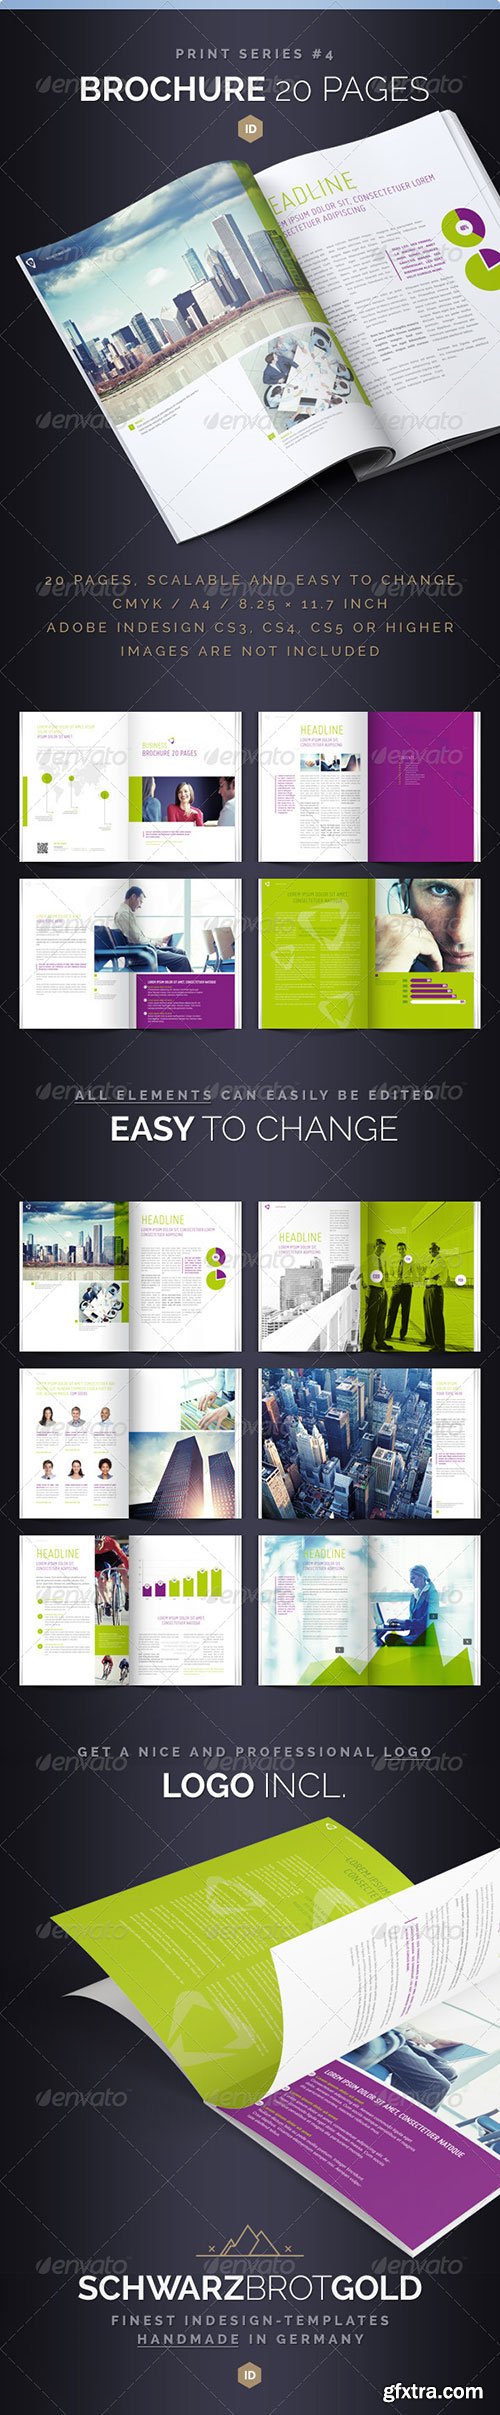 GraphicRiver - Brochure 20 Pages Print-Series #4